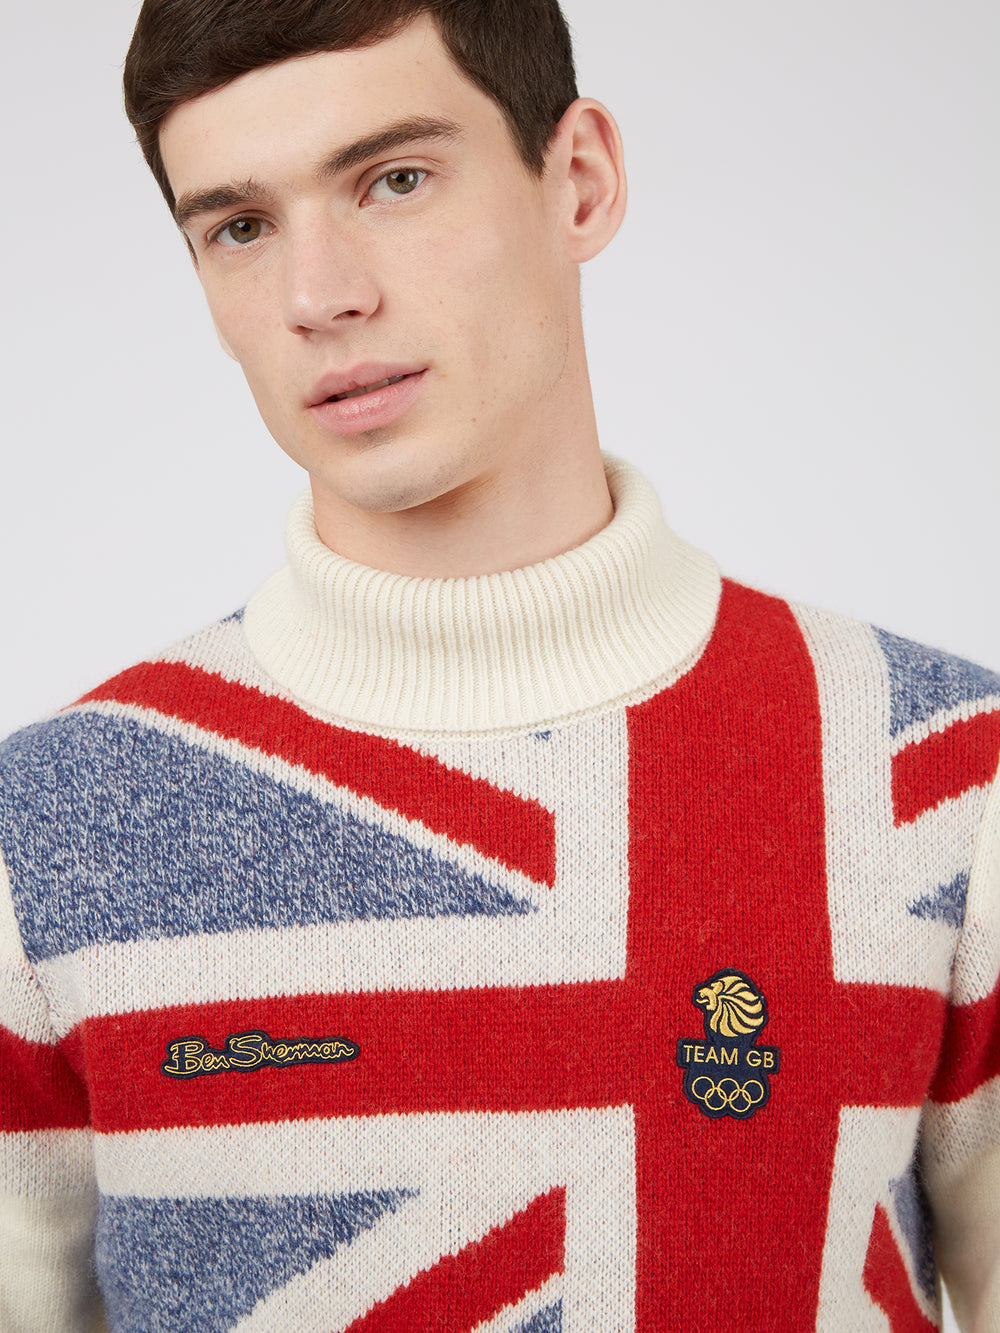 Team GB, Ben Sherman sweater, knitwear, Official 2022 Winter Olympics, Limited Edition Great Britain sweater, Beijing, GB flag, cream, close up